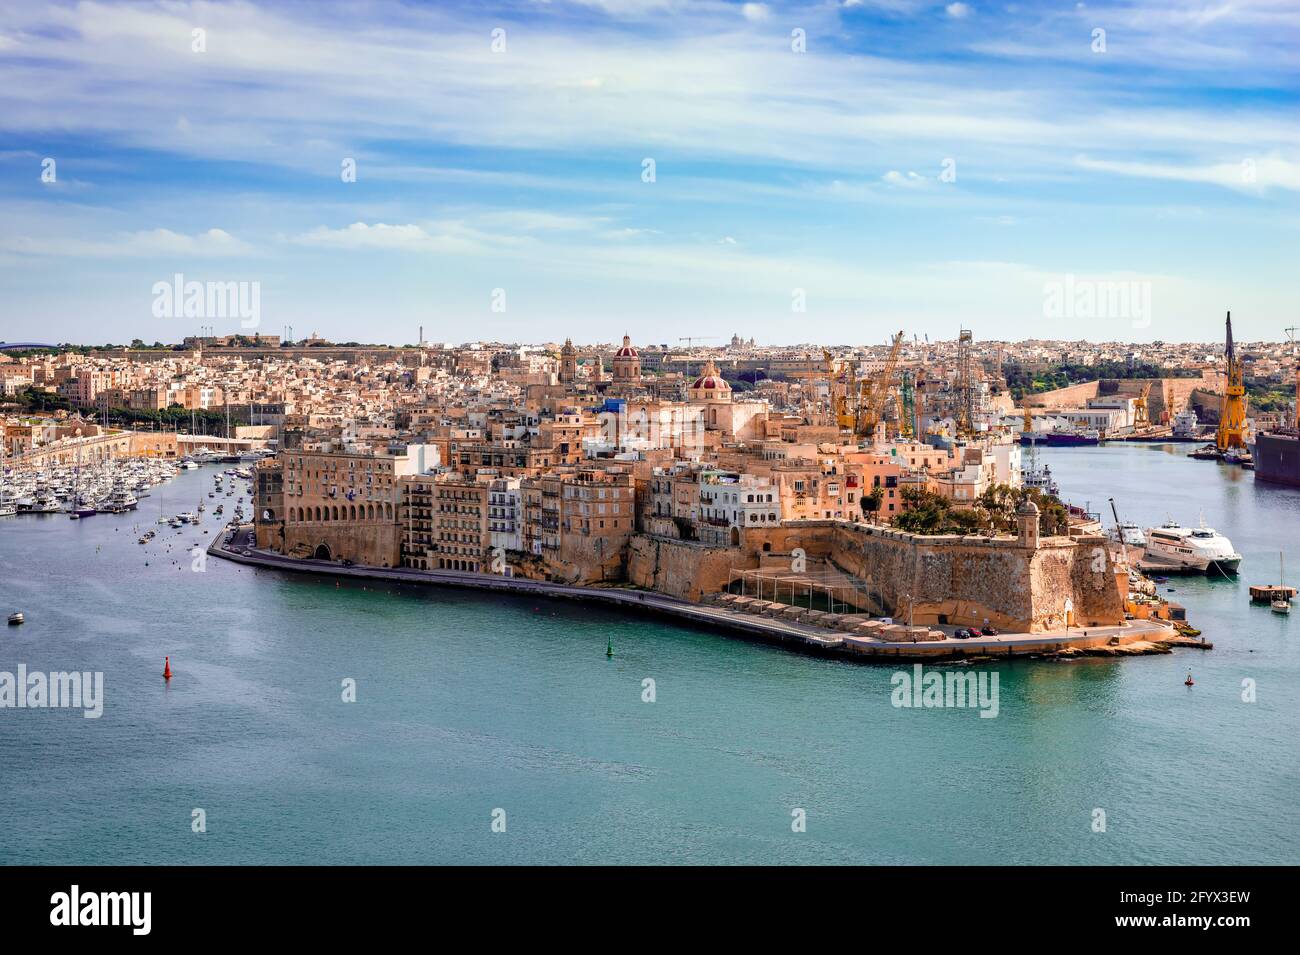 Valletta, Malta: View from Upper Barrakka Gardens. Birgu or Vittoriosa (one of the Three Cities at the Grand Harbour) dominates the picture. Stock Photo